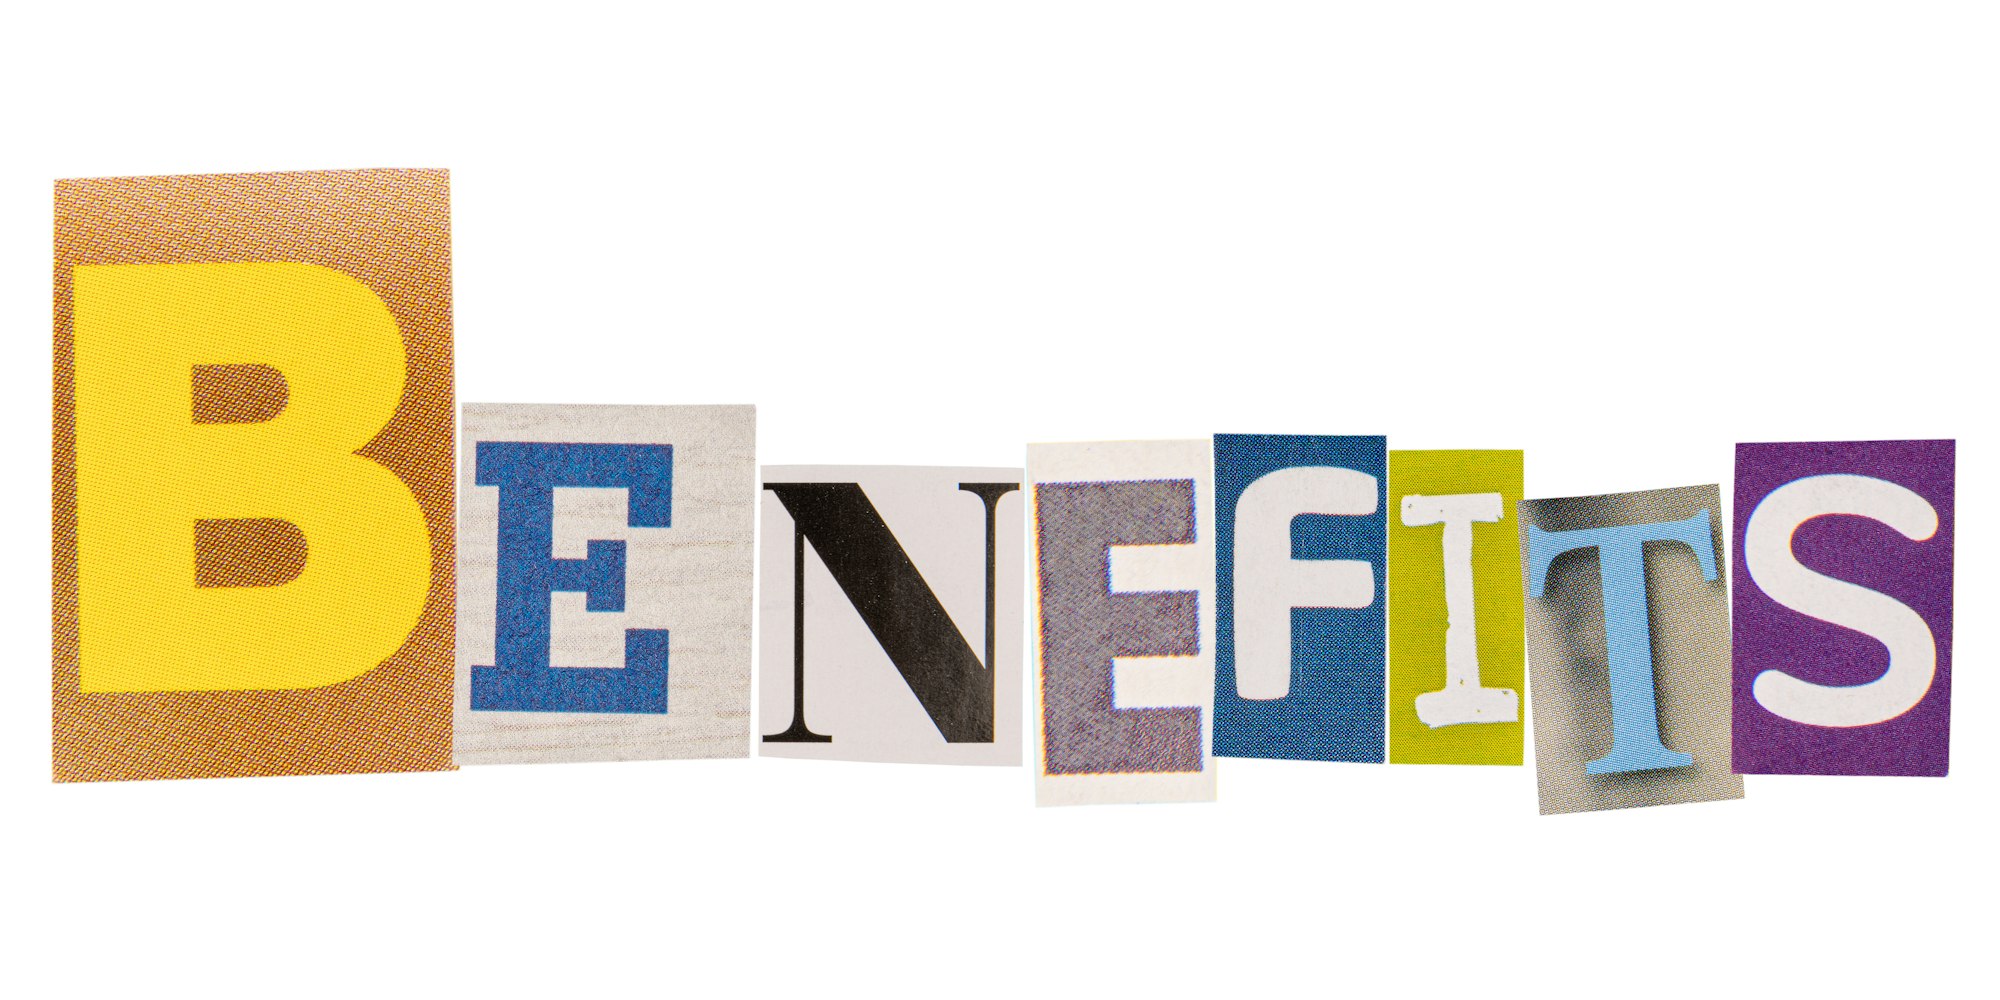 The word benefits made from cutout letters